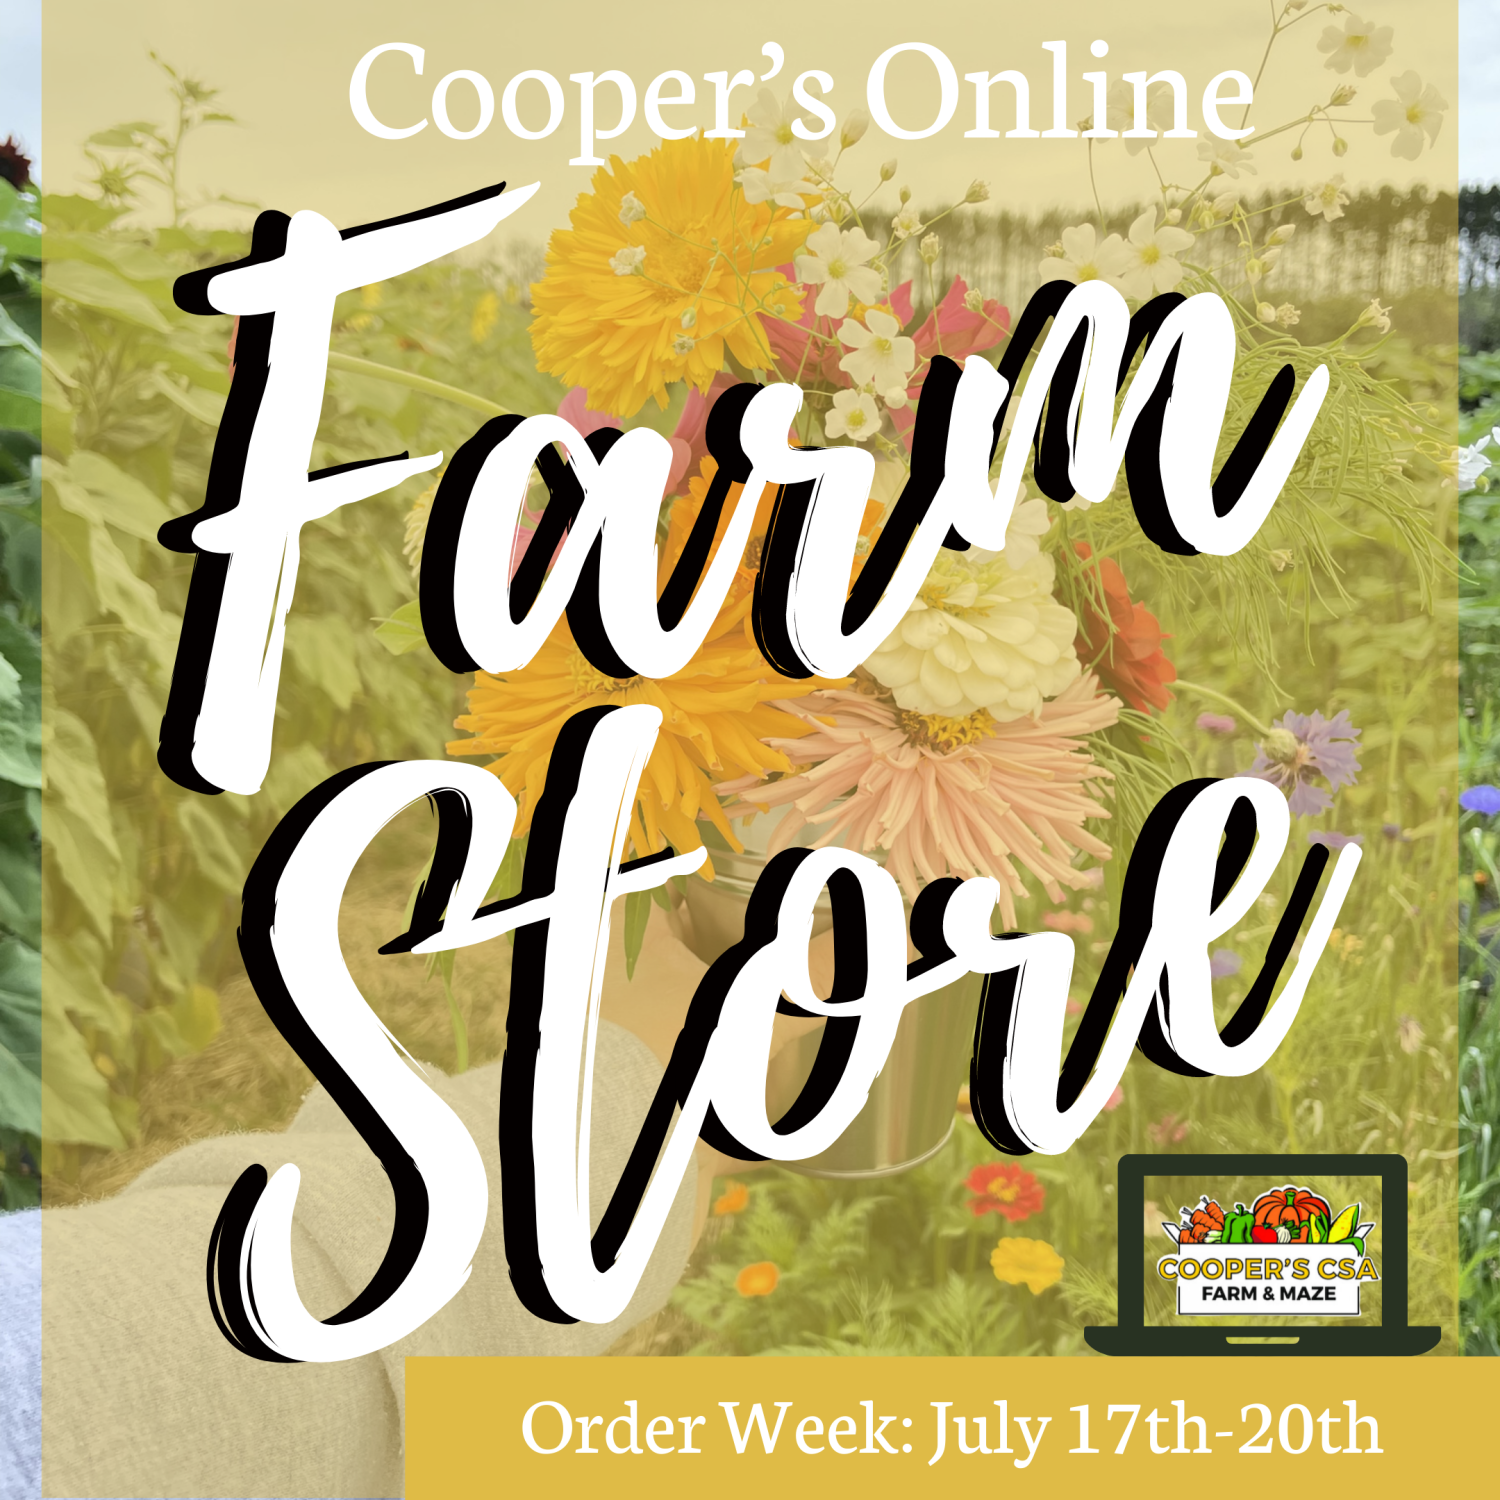 Next Happening: Coopers CSA Online FarmStore- Order week July 17th-20th